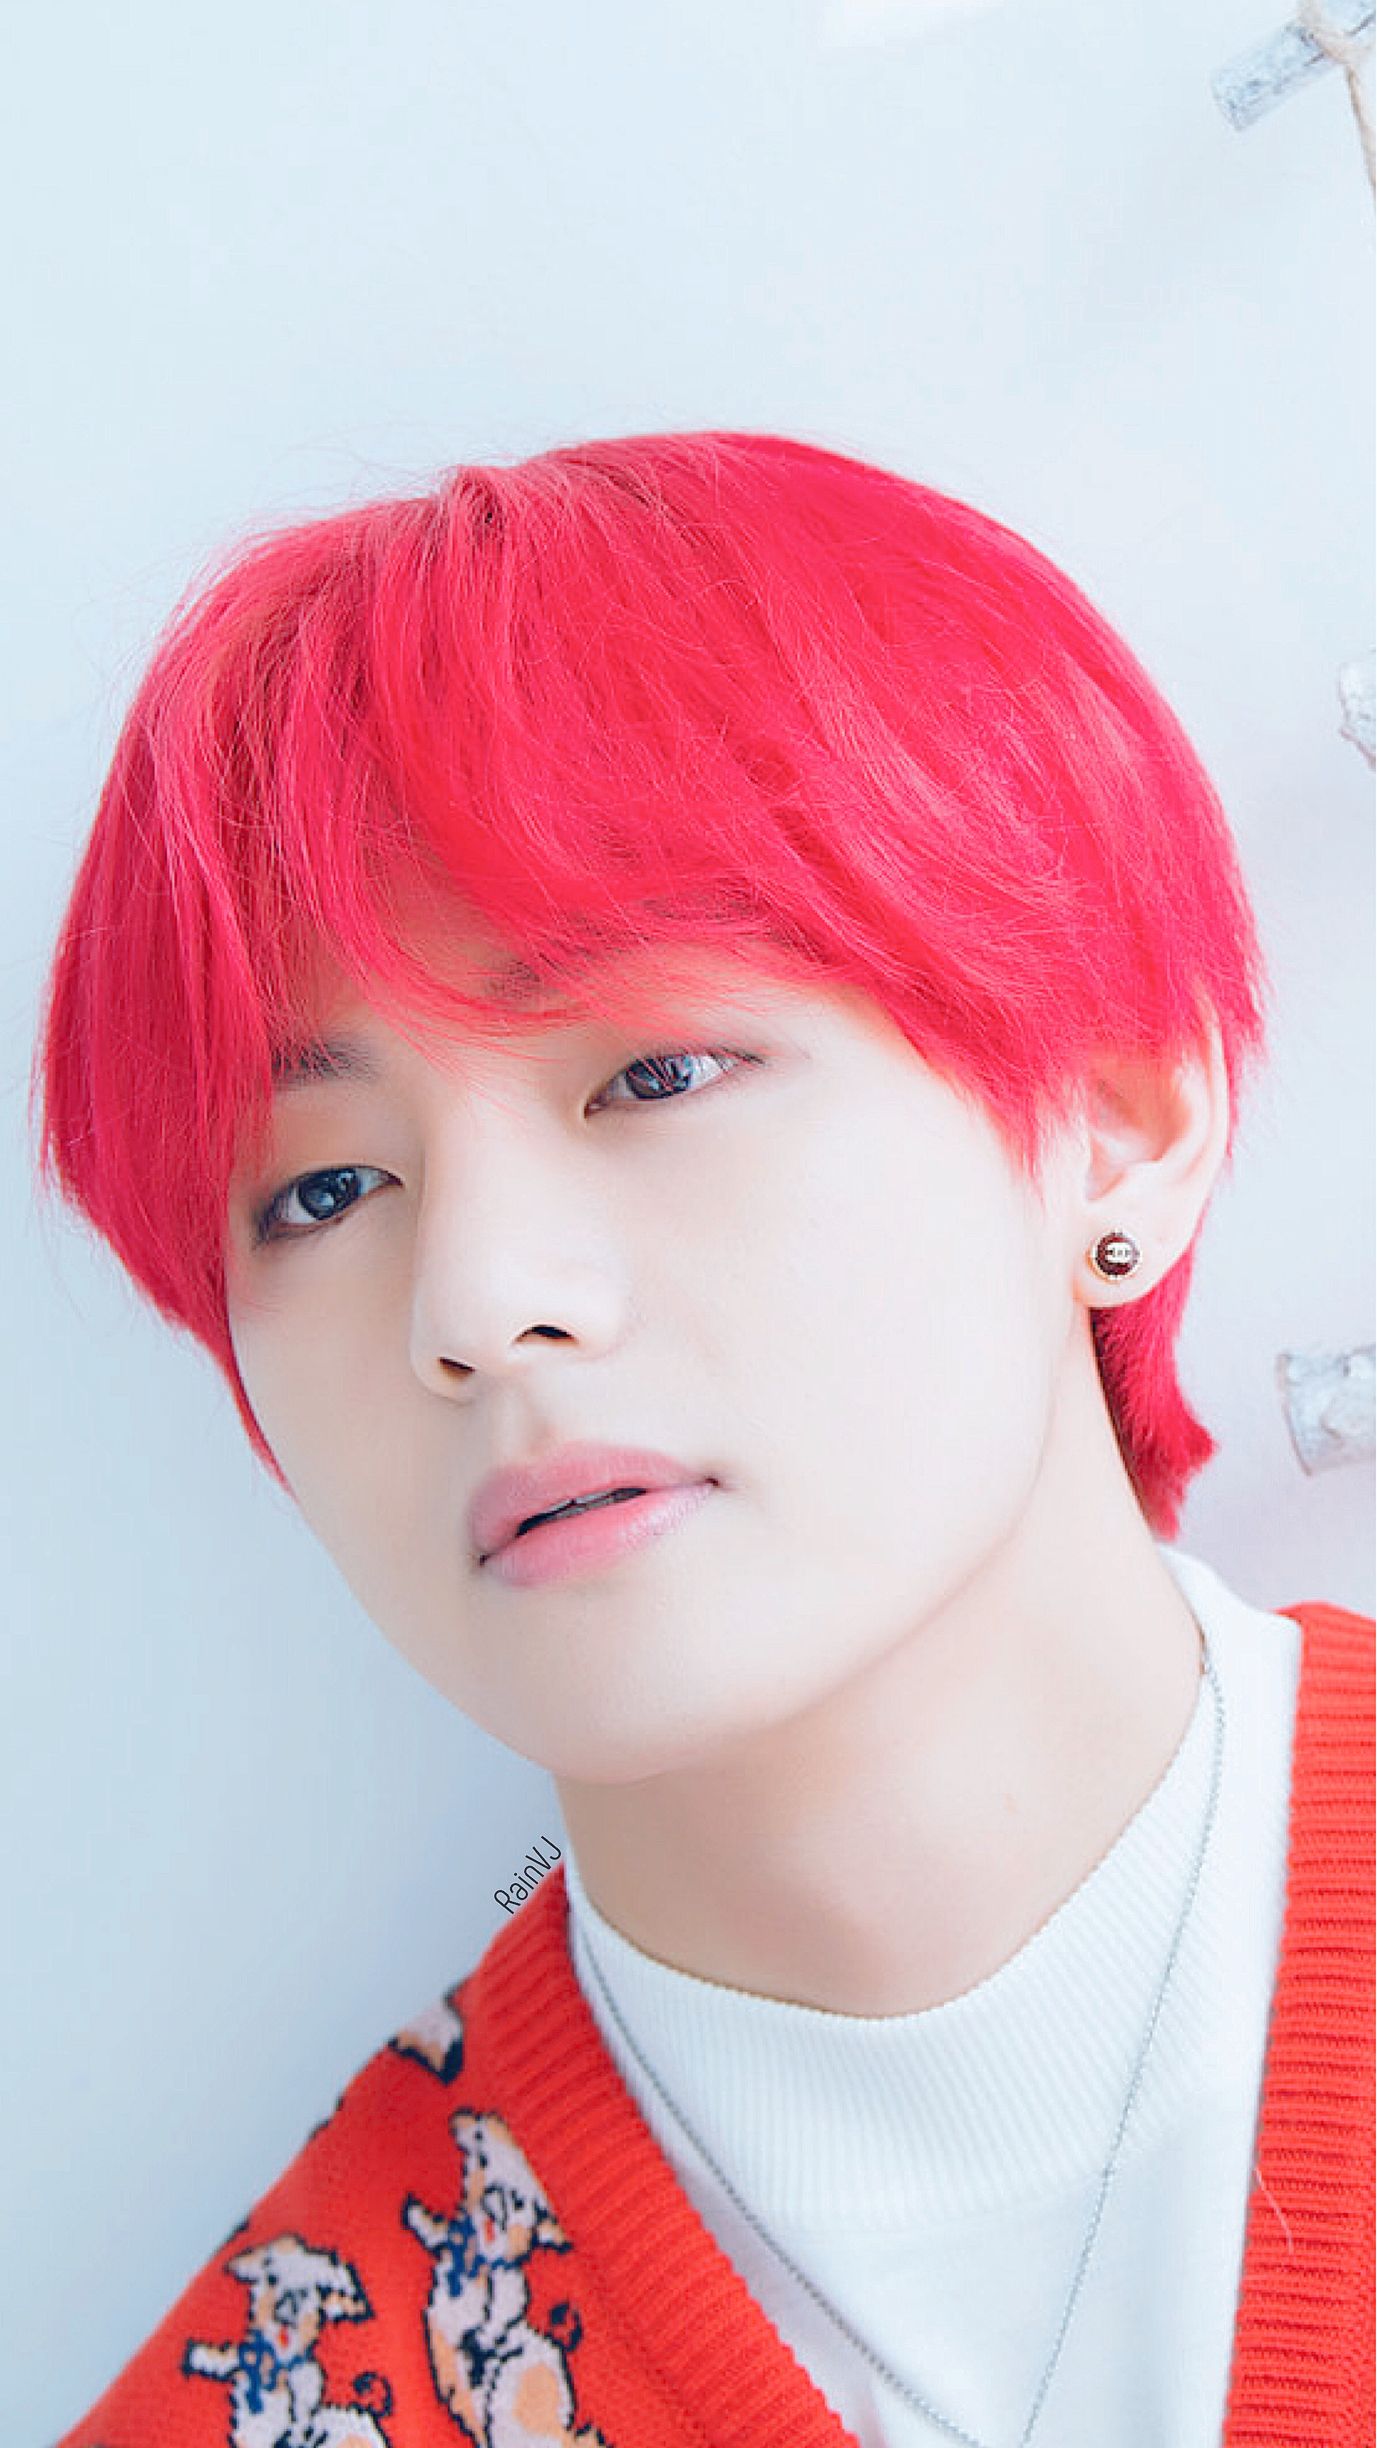 BTS V Red Hair Wallpapers - Wallpaper Cave